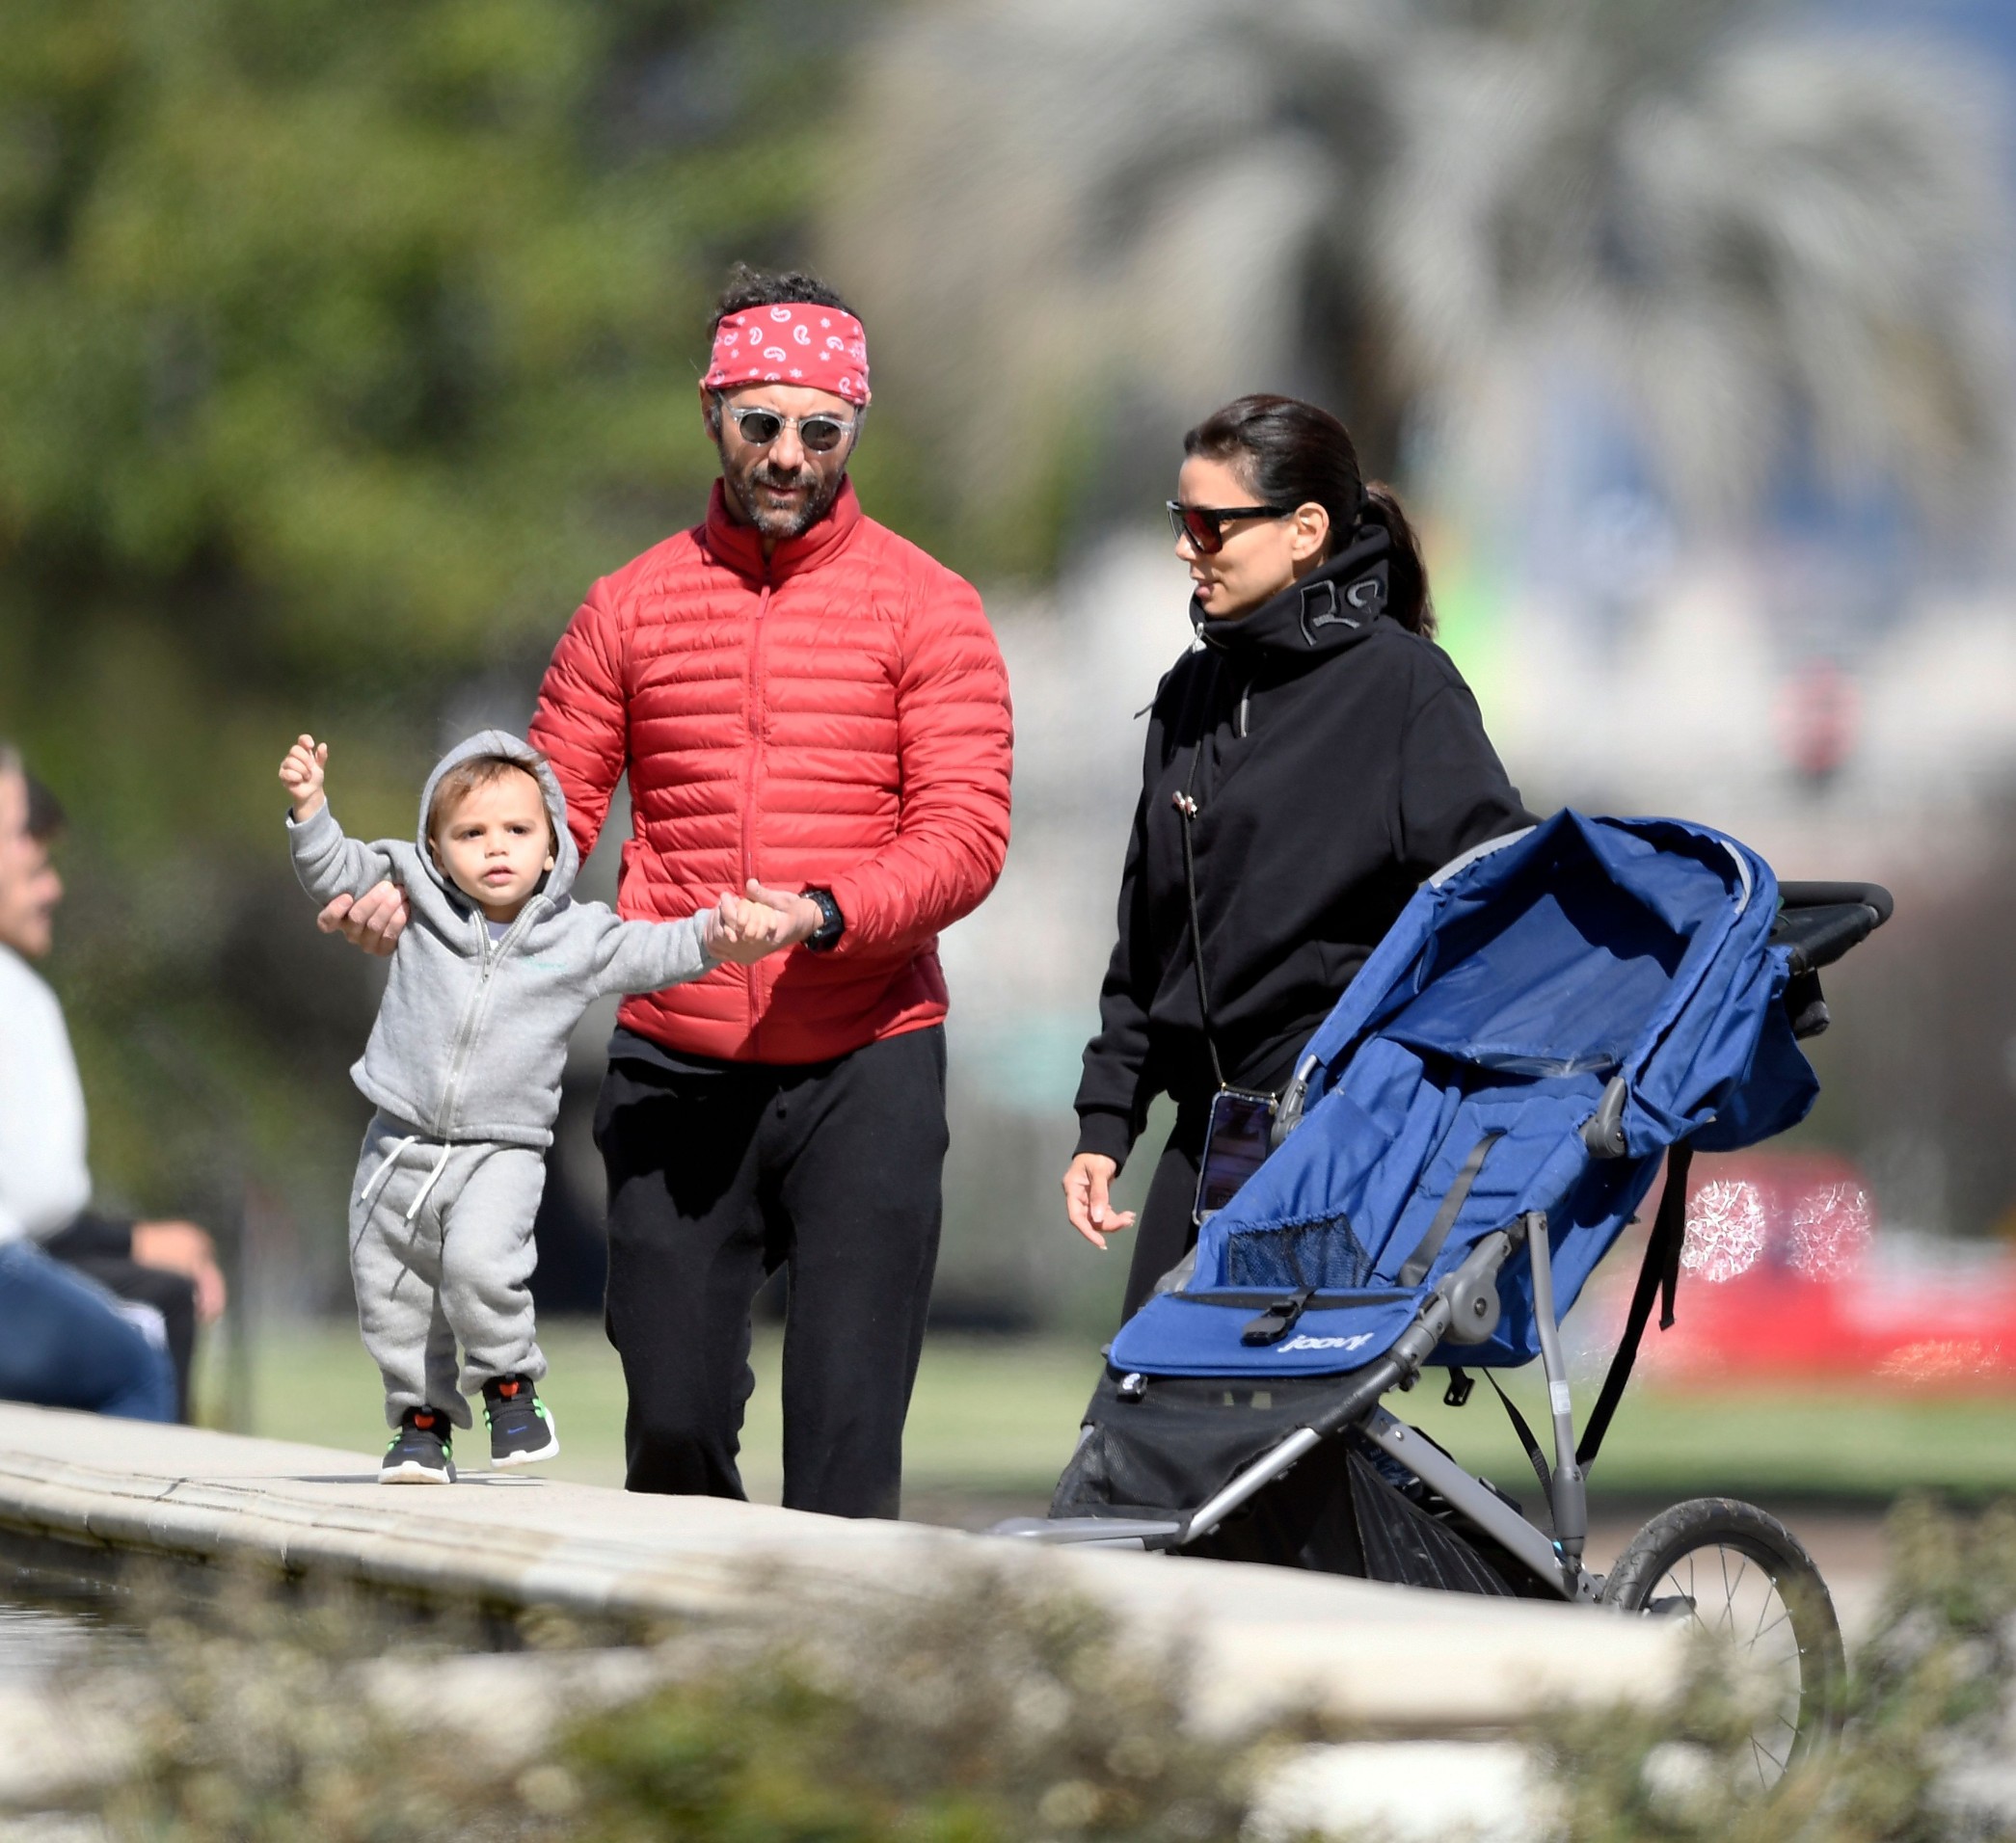 03/17/2020 EXCLUSIVE: Eva Longoria enjoys a trip to a park with family in Beverly Hills, California. The 45 year old actress wore an all black outfit while her husband, Jose Baston sported a red puffer jacket, black sweats, and a red bandana. **VIDEO AVAILABLE**, Image: 507526349, License: Rights-managed, Restrictions: Exclusive NO usage without agreed price and terms. Please contact sales@theimagedirect.com, Model Release: no, Credit line: TheImageDirect.com / The Image Direct / Profimedia